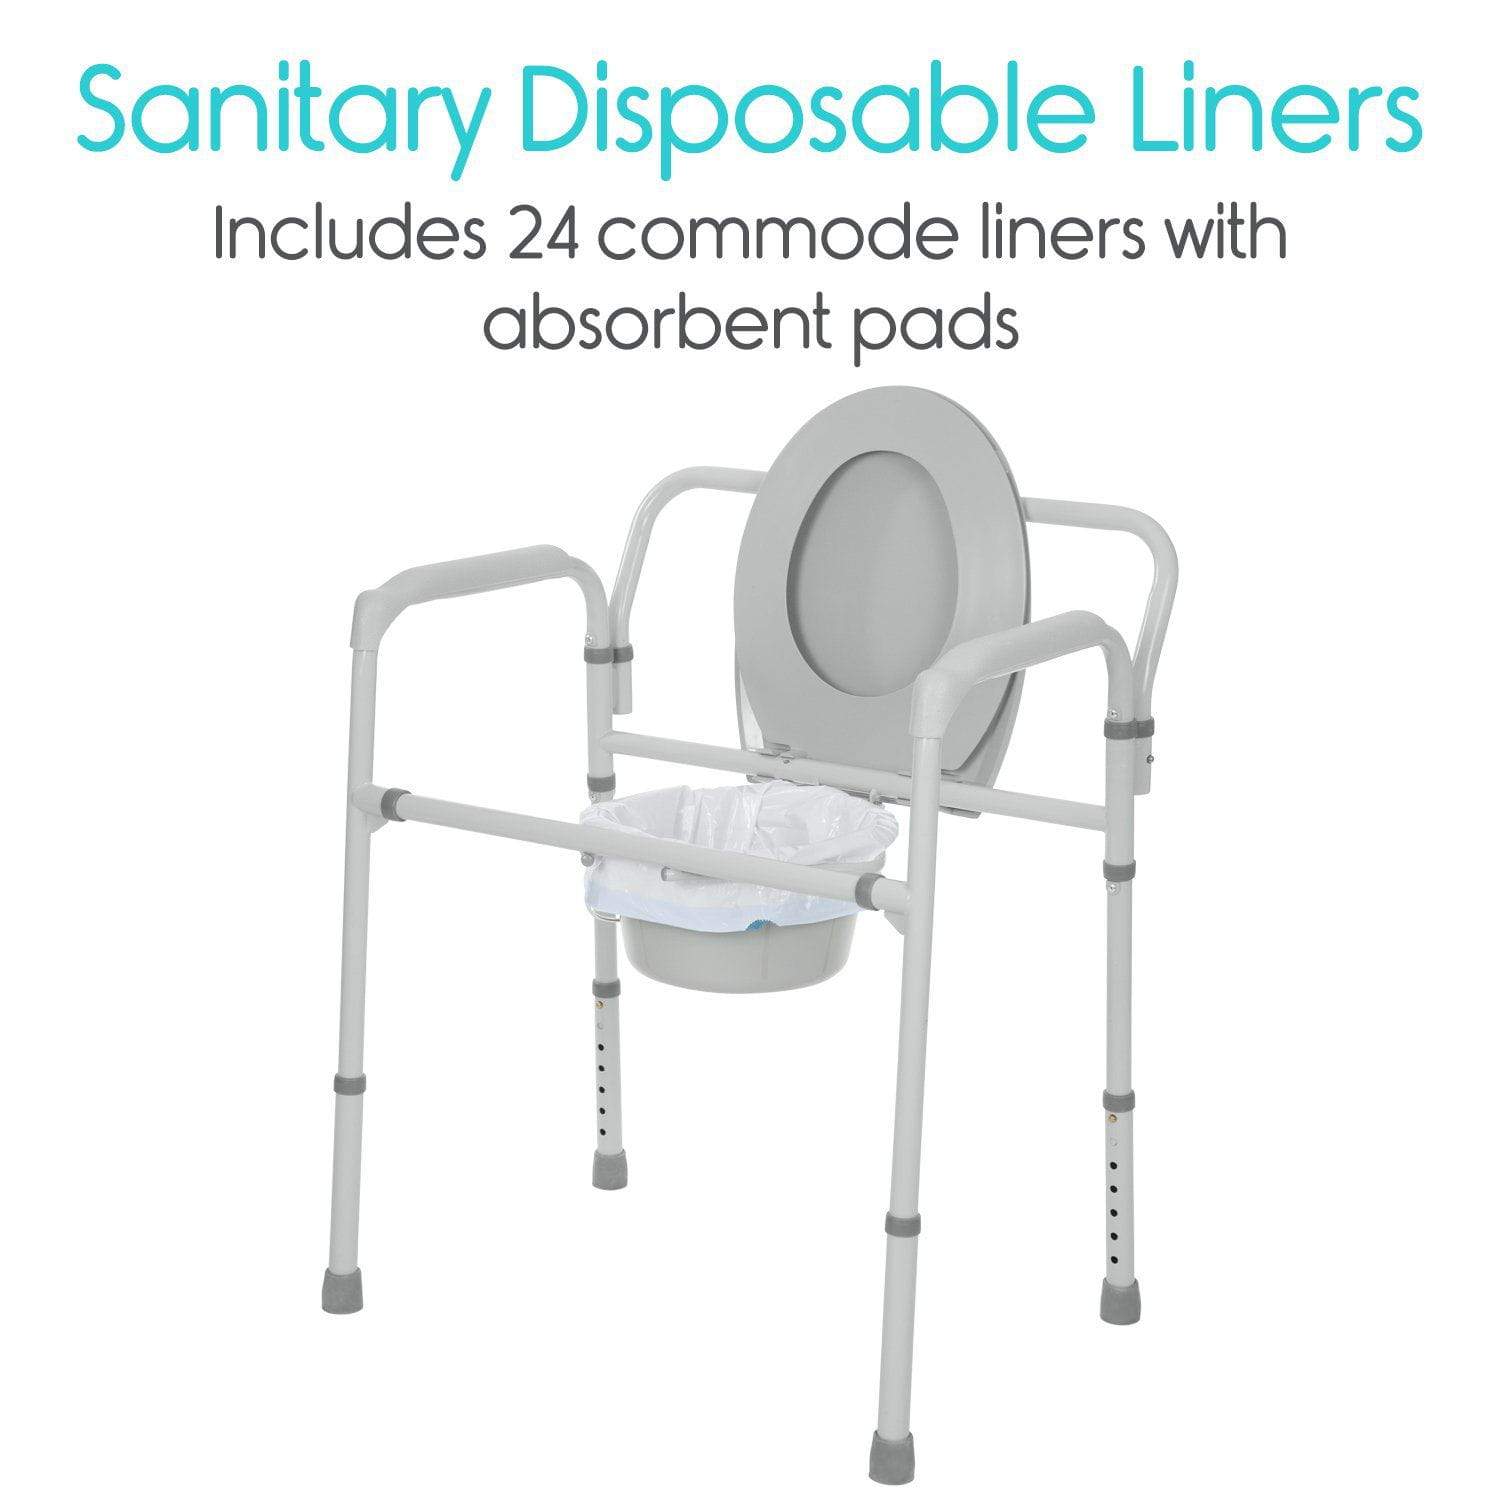 commode liners for pails